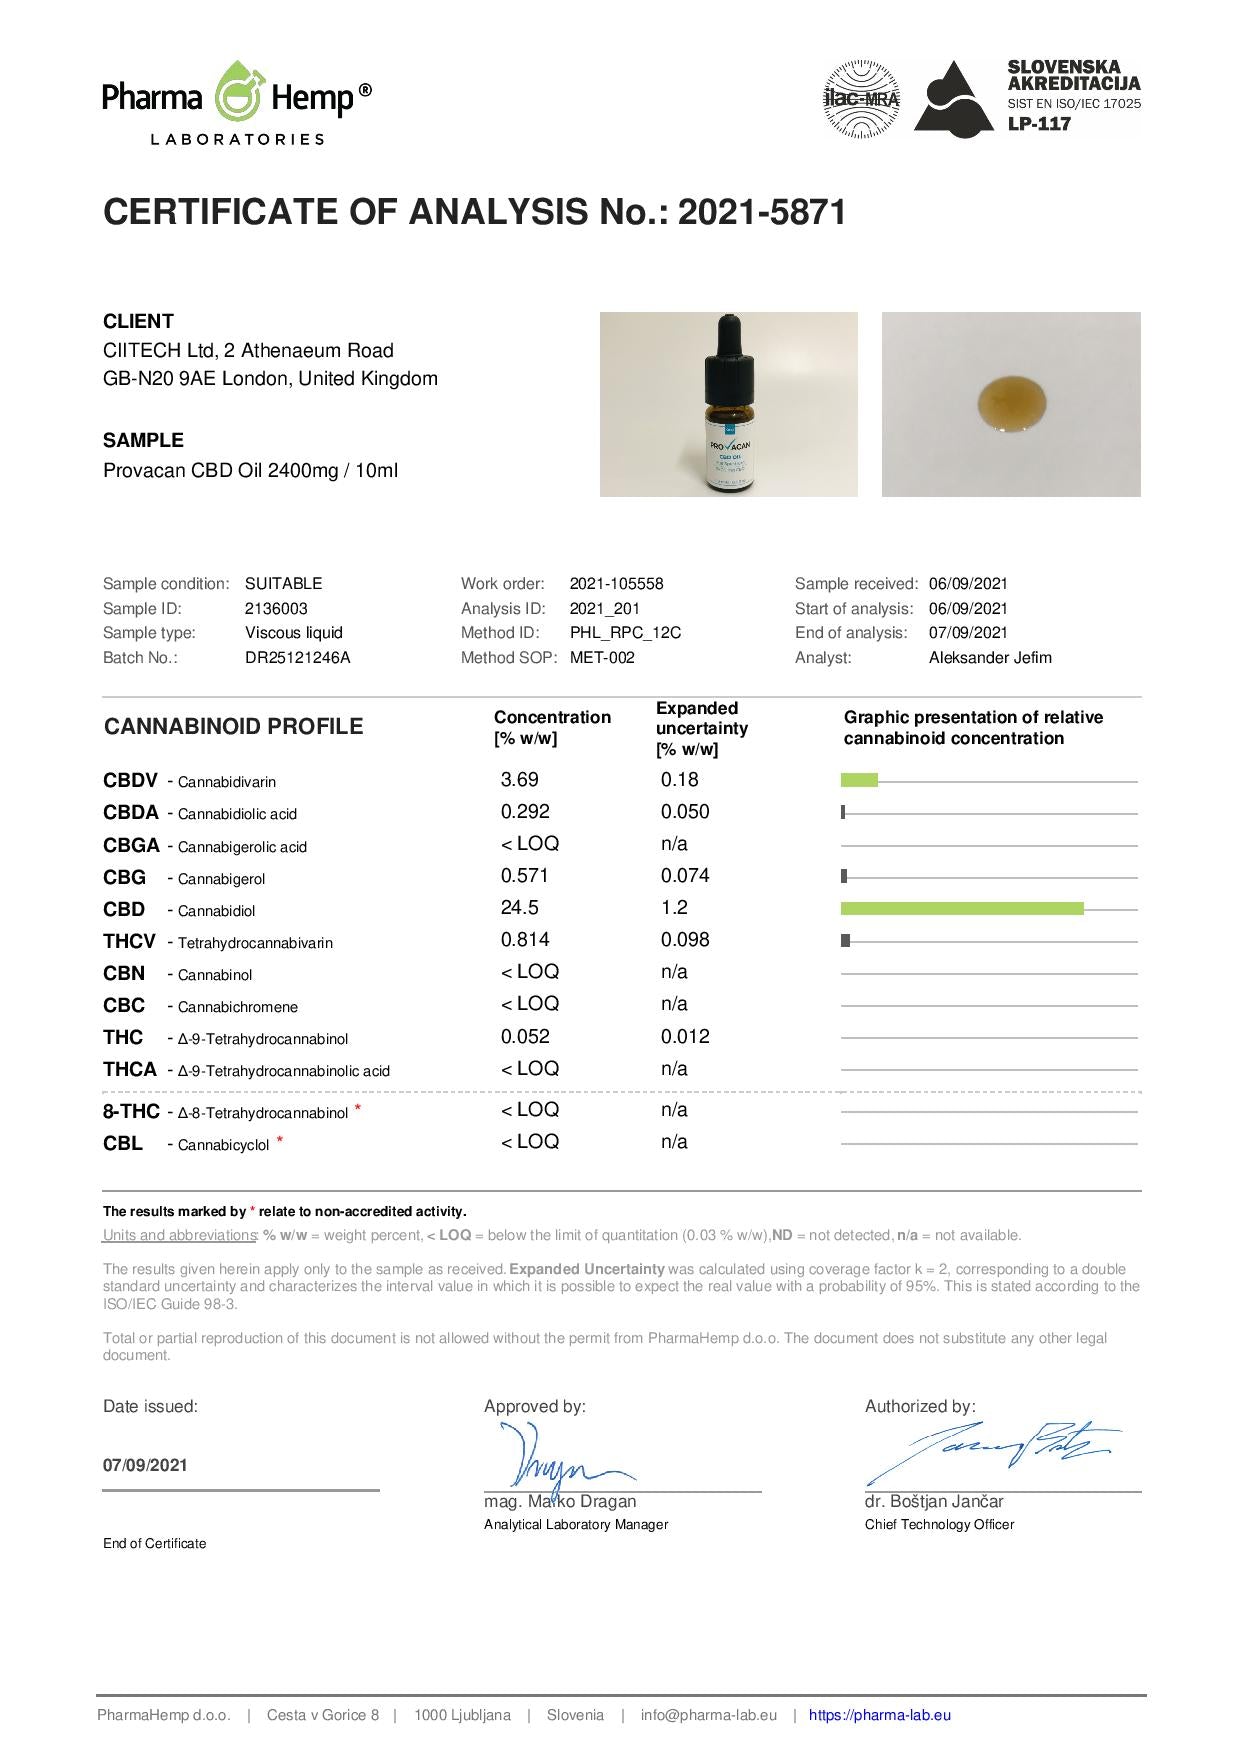 made by: Provacan price:£114.00 Provacan 2400mg Full Spectrum CBD Oil - 10ml next day delivery at Vape Street UK